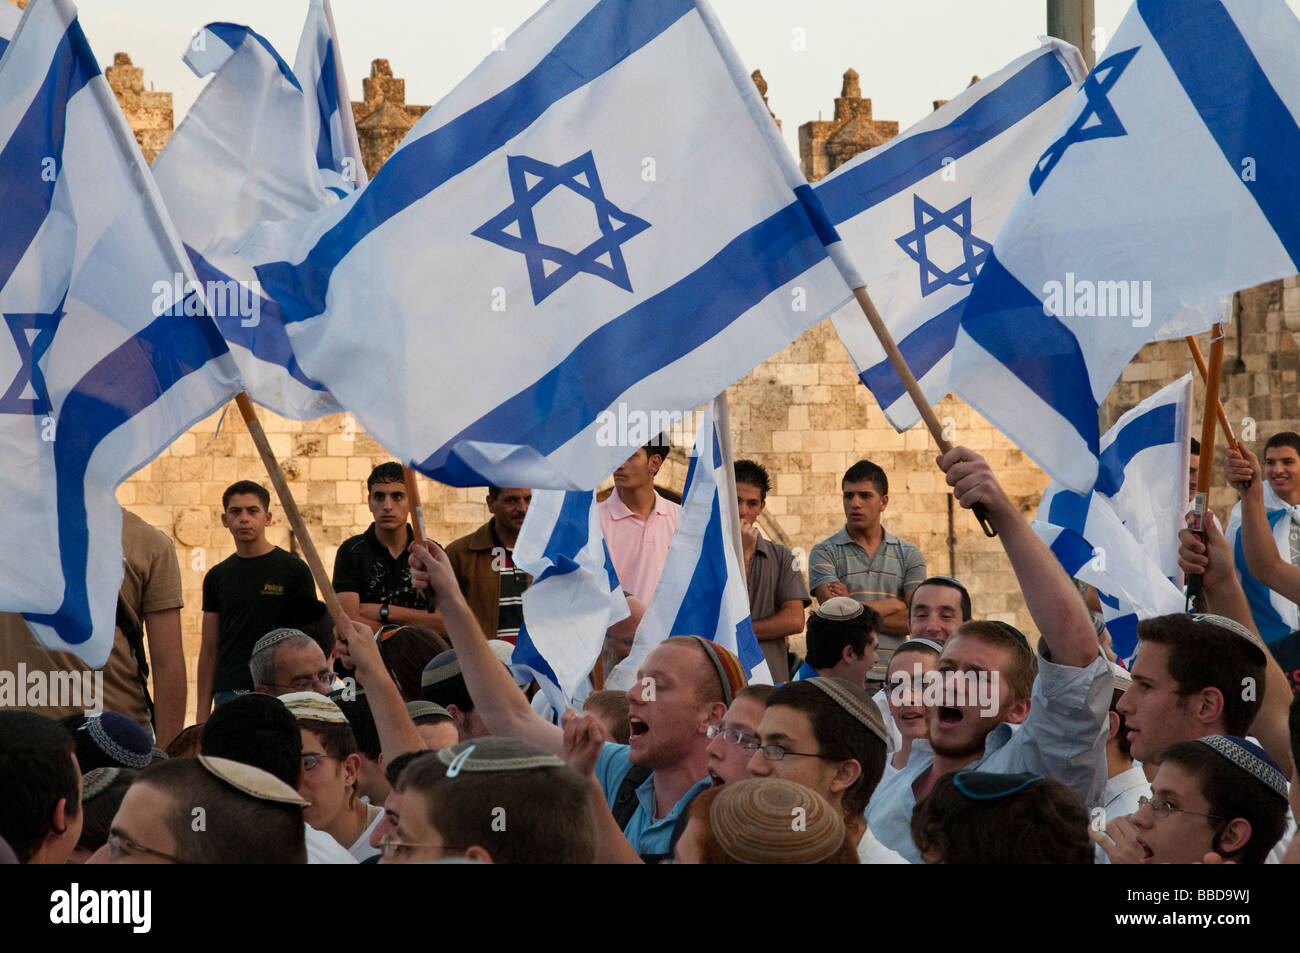 Israel Jerusalem Jerusalem day celebration Young religious israeli men marching with flags and Palestinian men watching Stock Photo